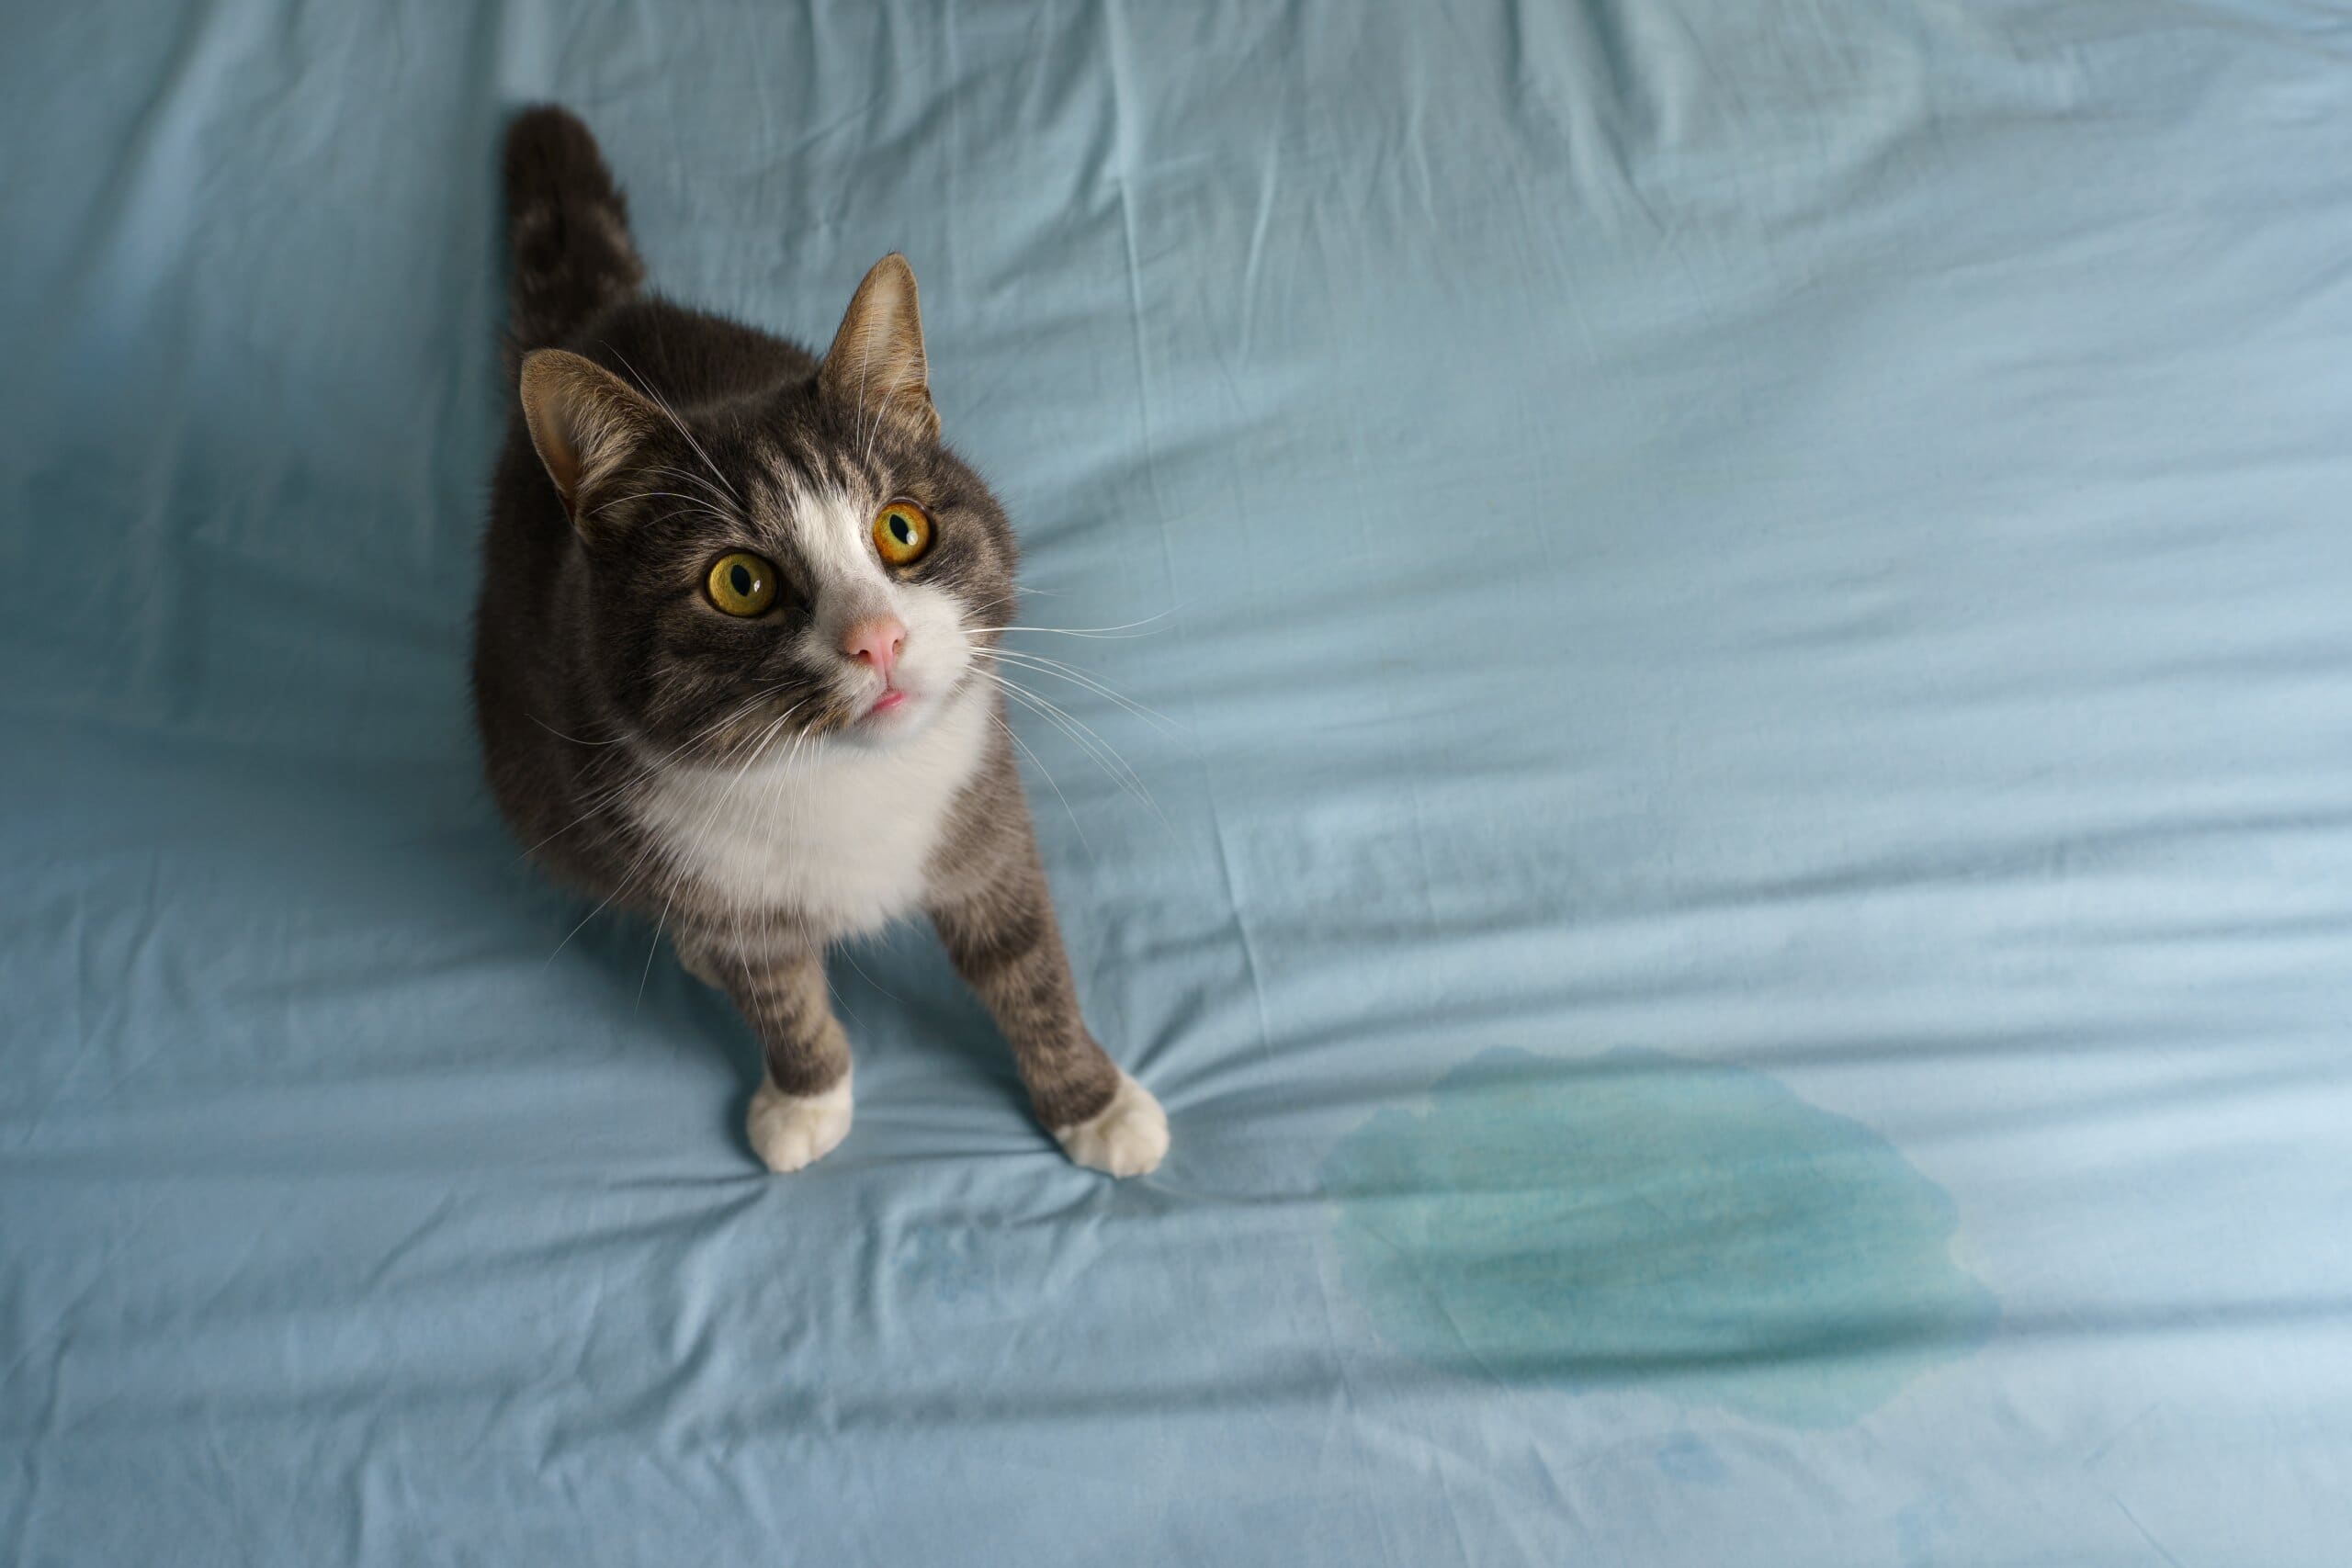 Cat sitting on bed looking up, next to a pee wet patch on the mattress.